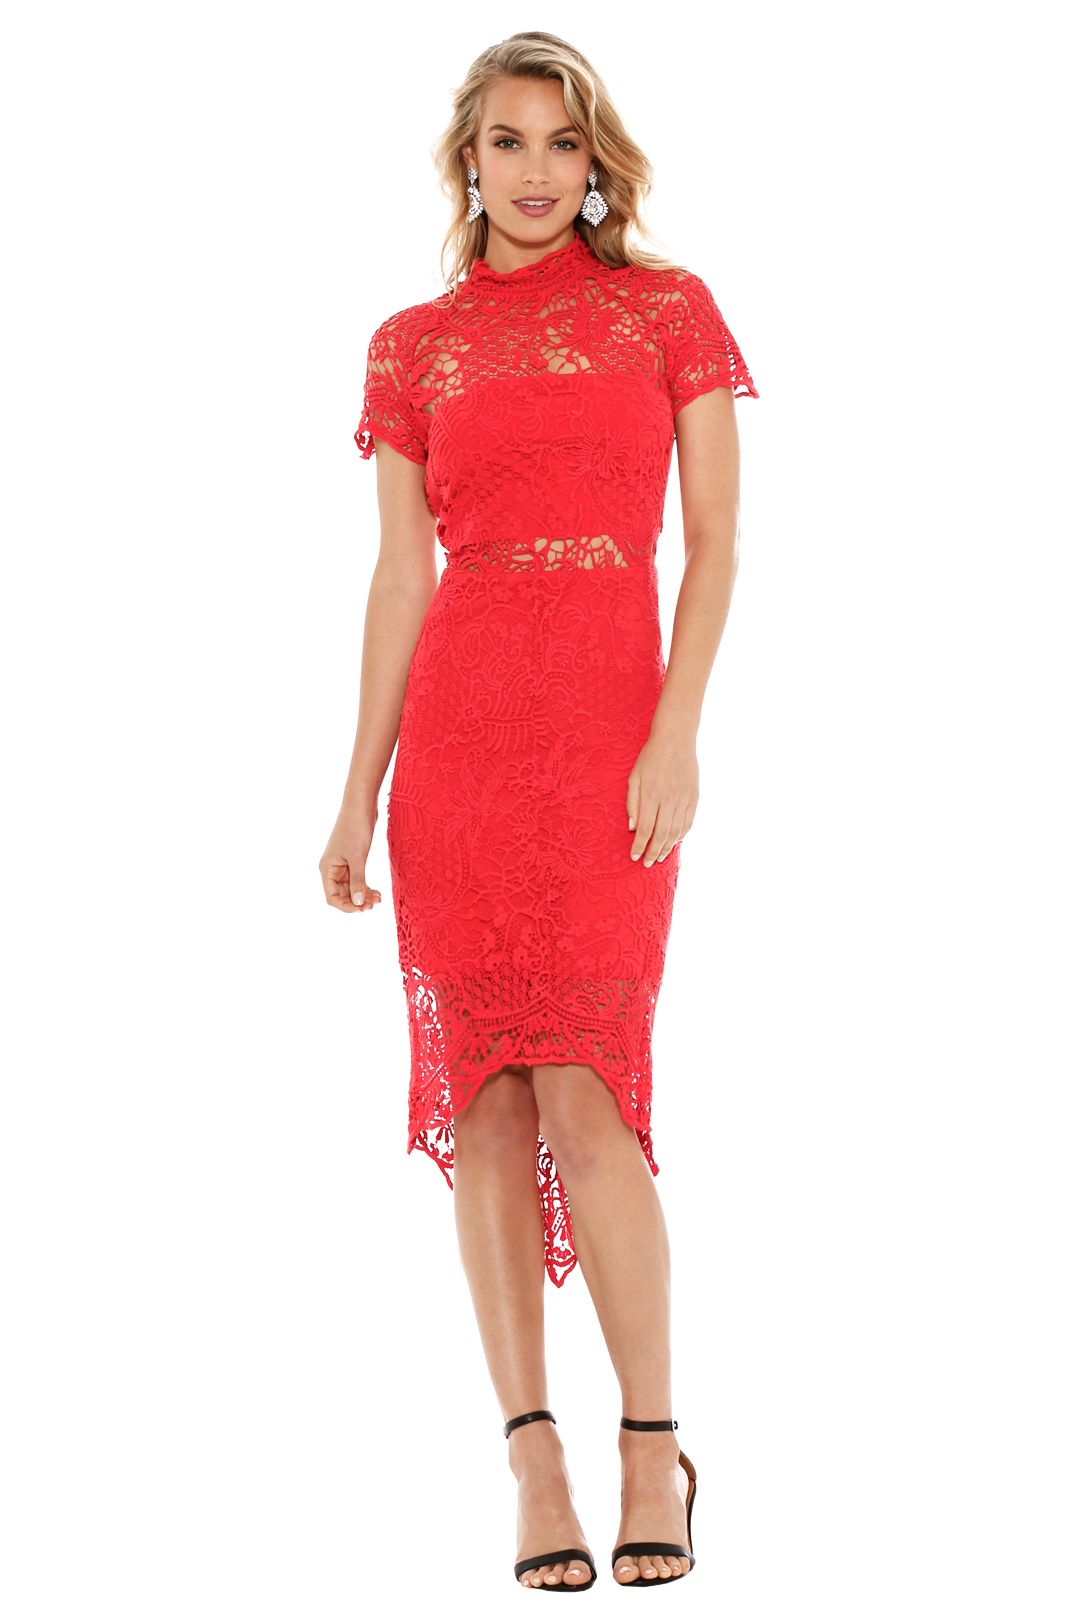 Thurley - Bed Of Roses Lace Dress - Red - Front